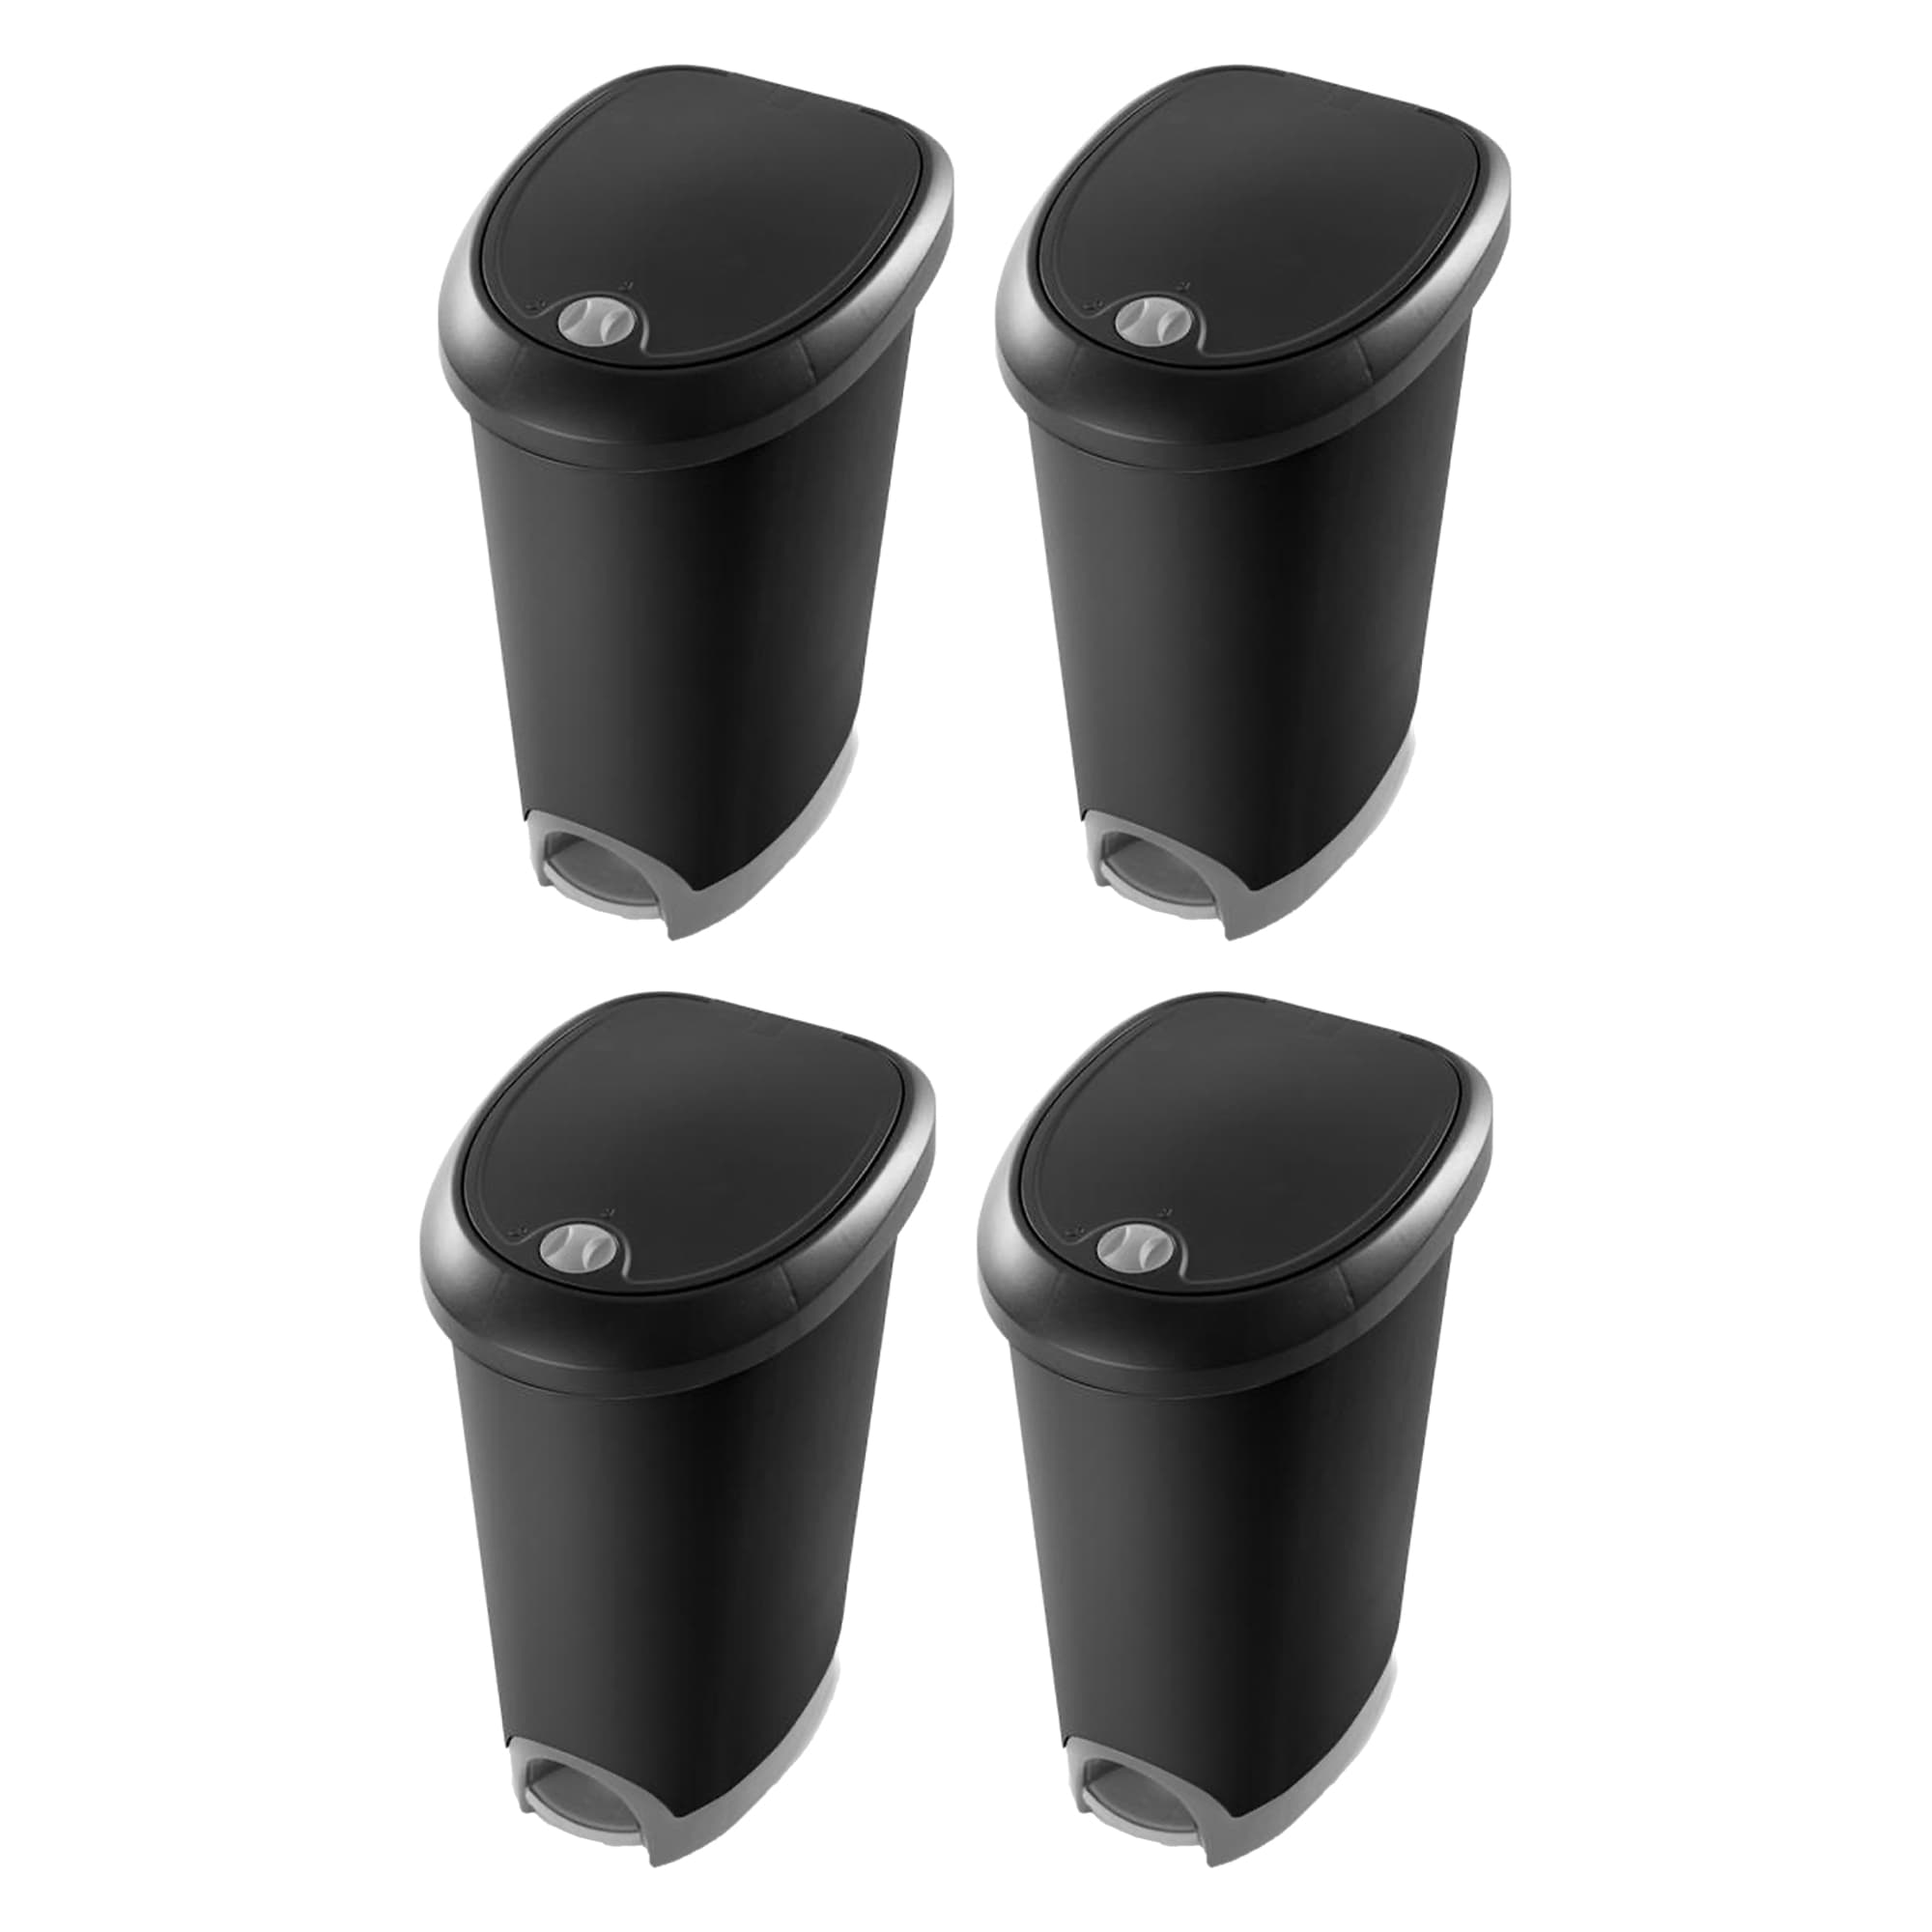 Kohler K-20956-BST Black Stainless Dual-Compartment Step Trash Can